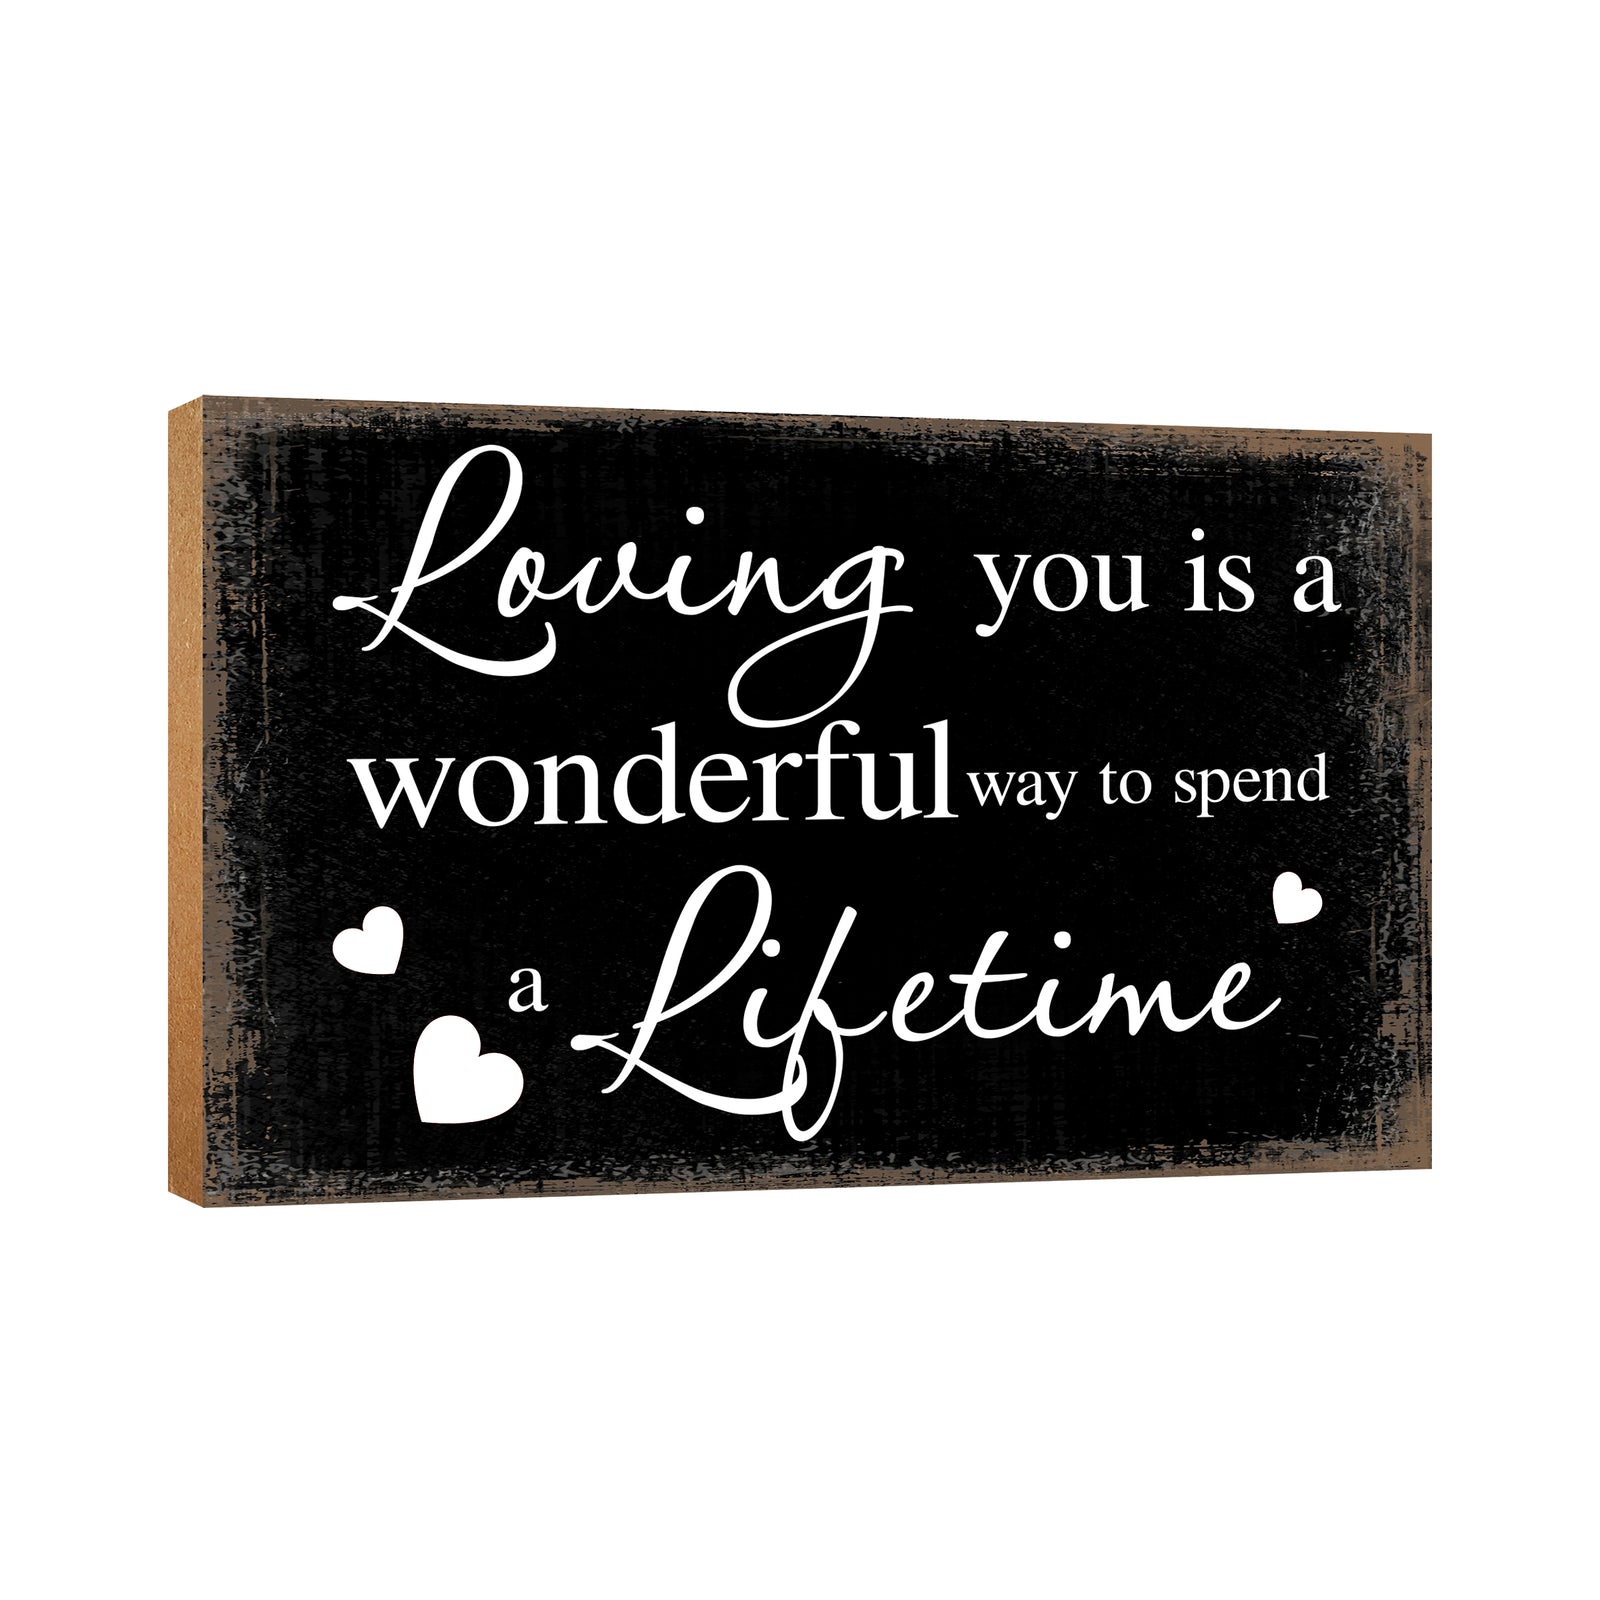 LifeSong Milestones Wooden Table Top and Shelf Décor Gift for Husband or Boyfriend